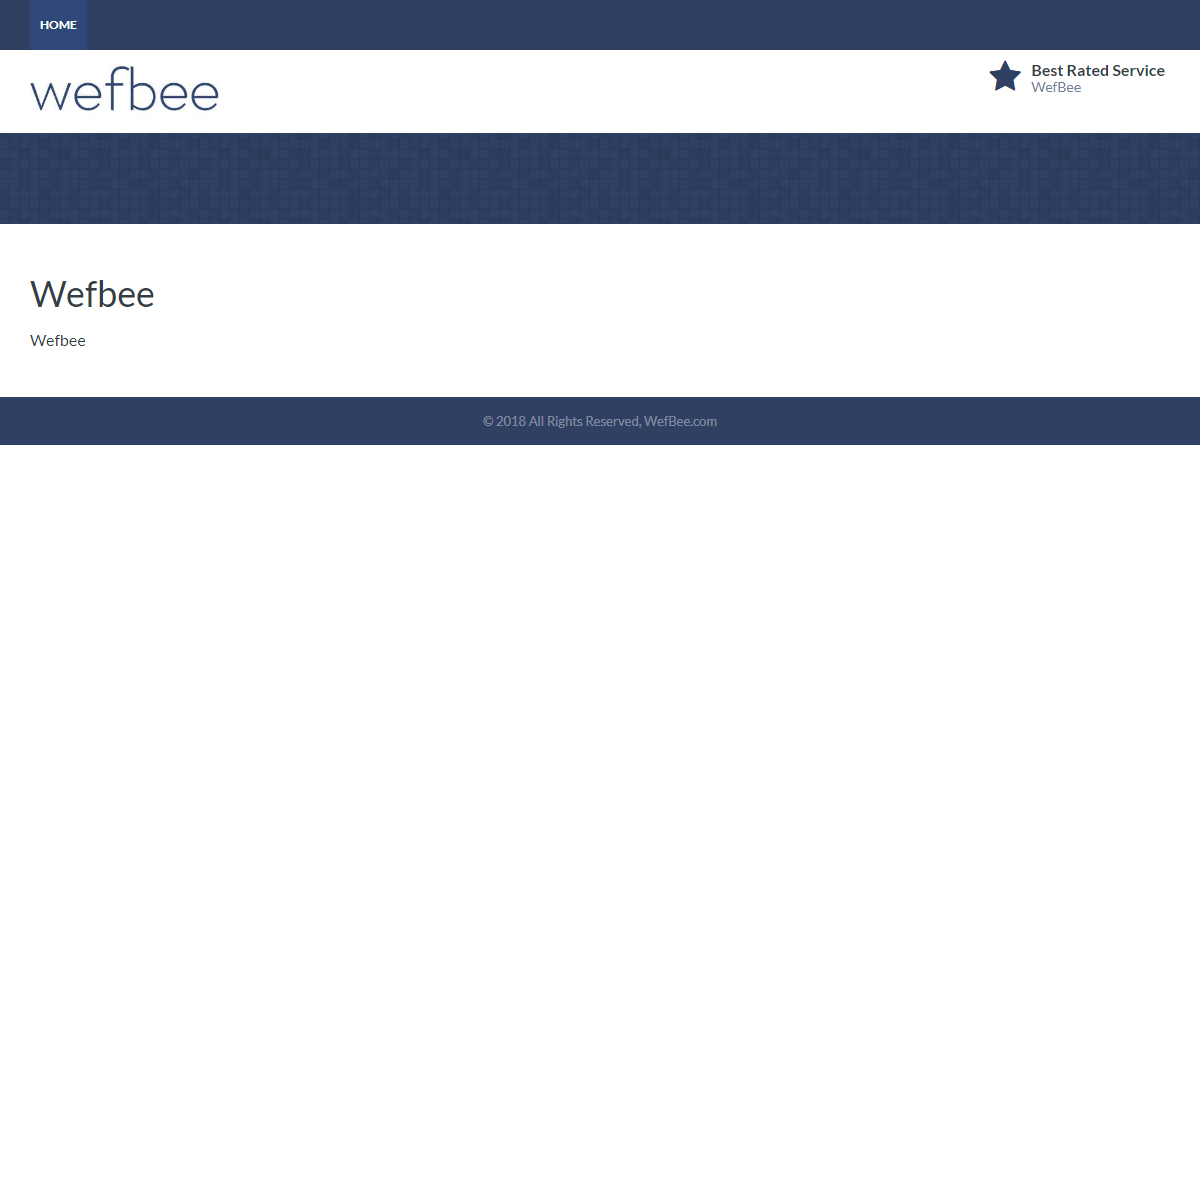 A complete backup of https://wefbee.com/autofollowers